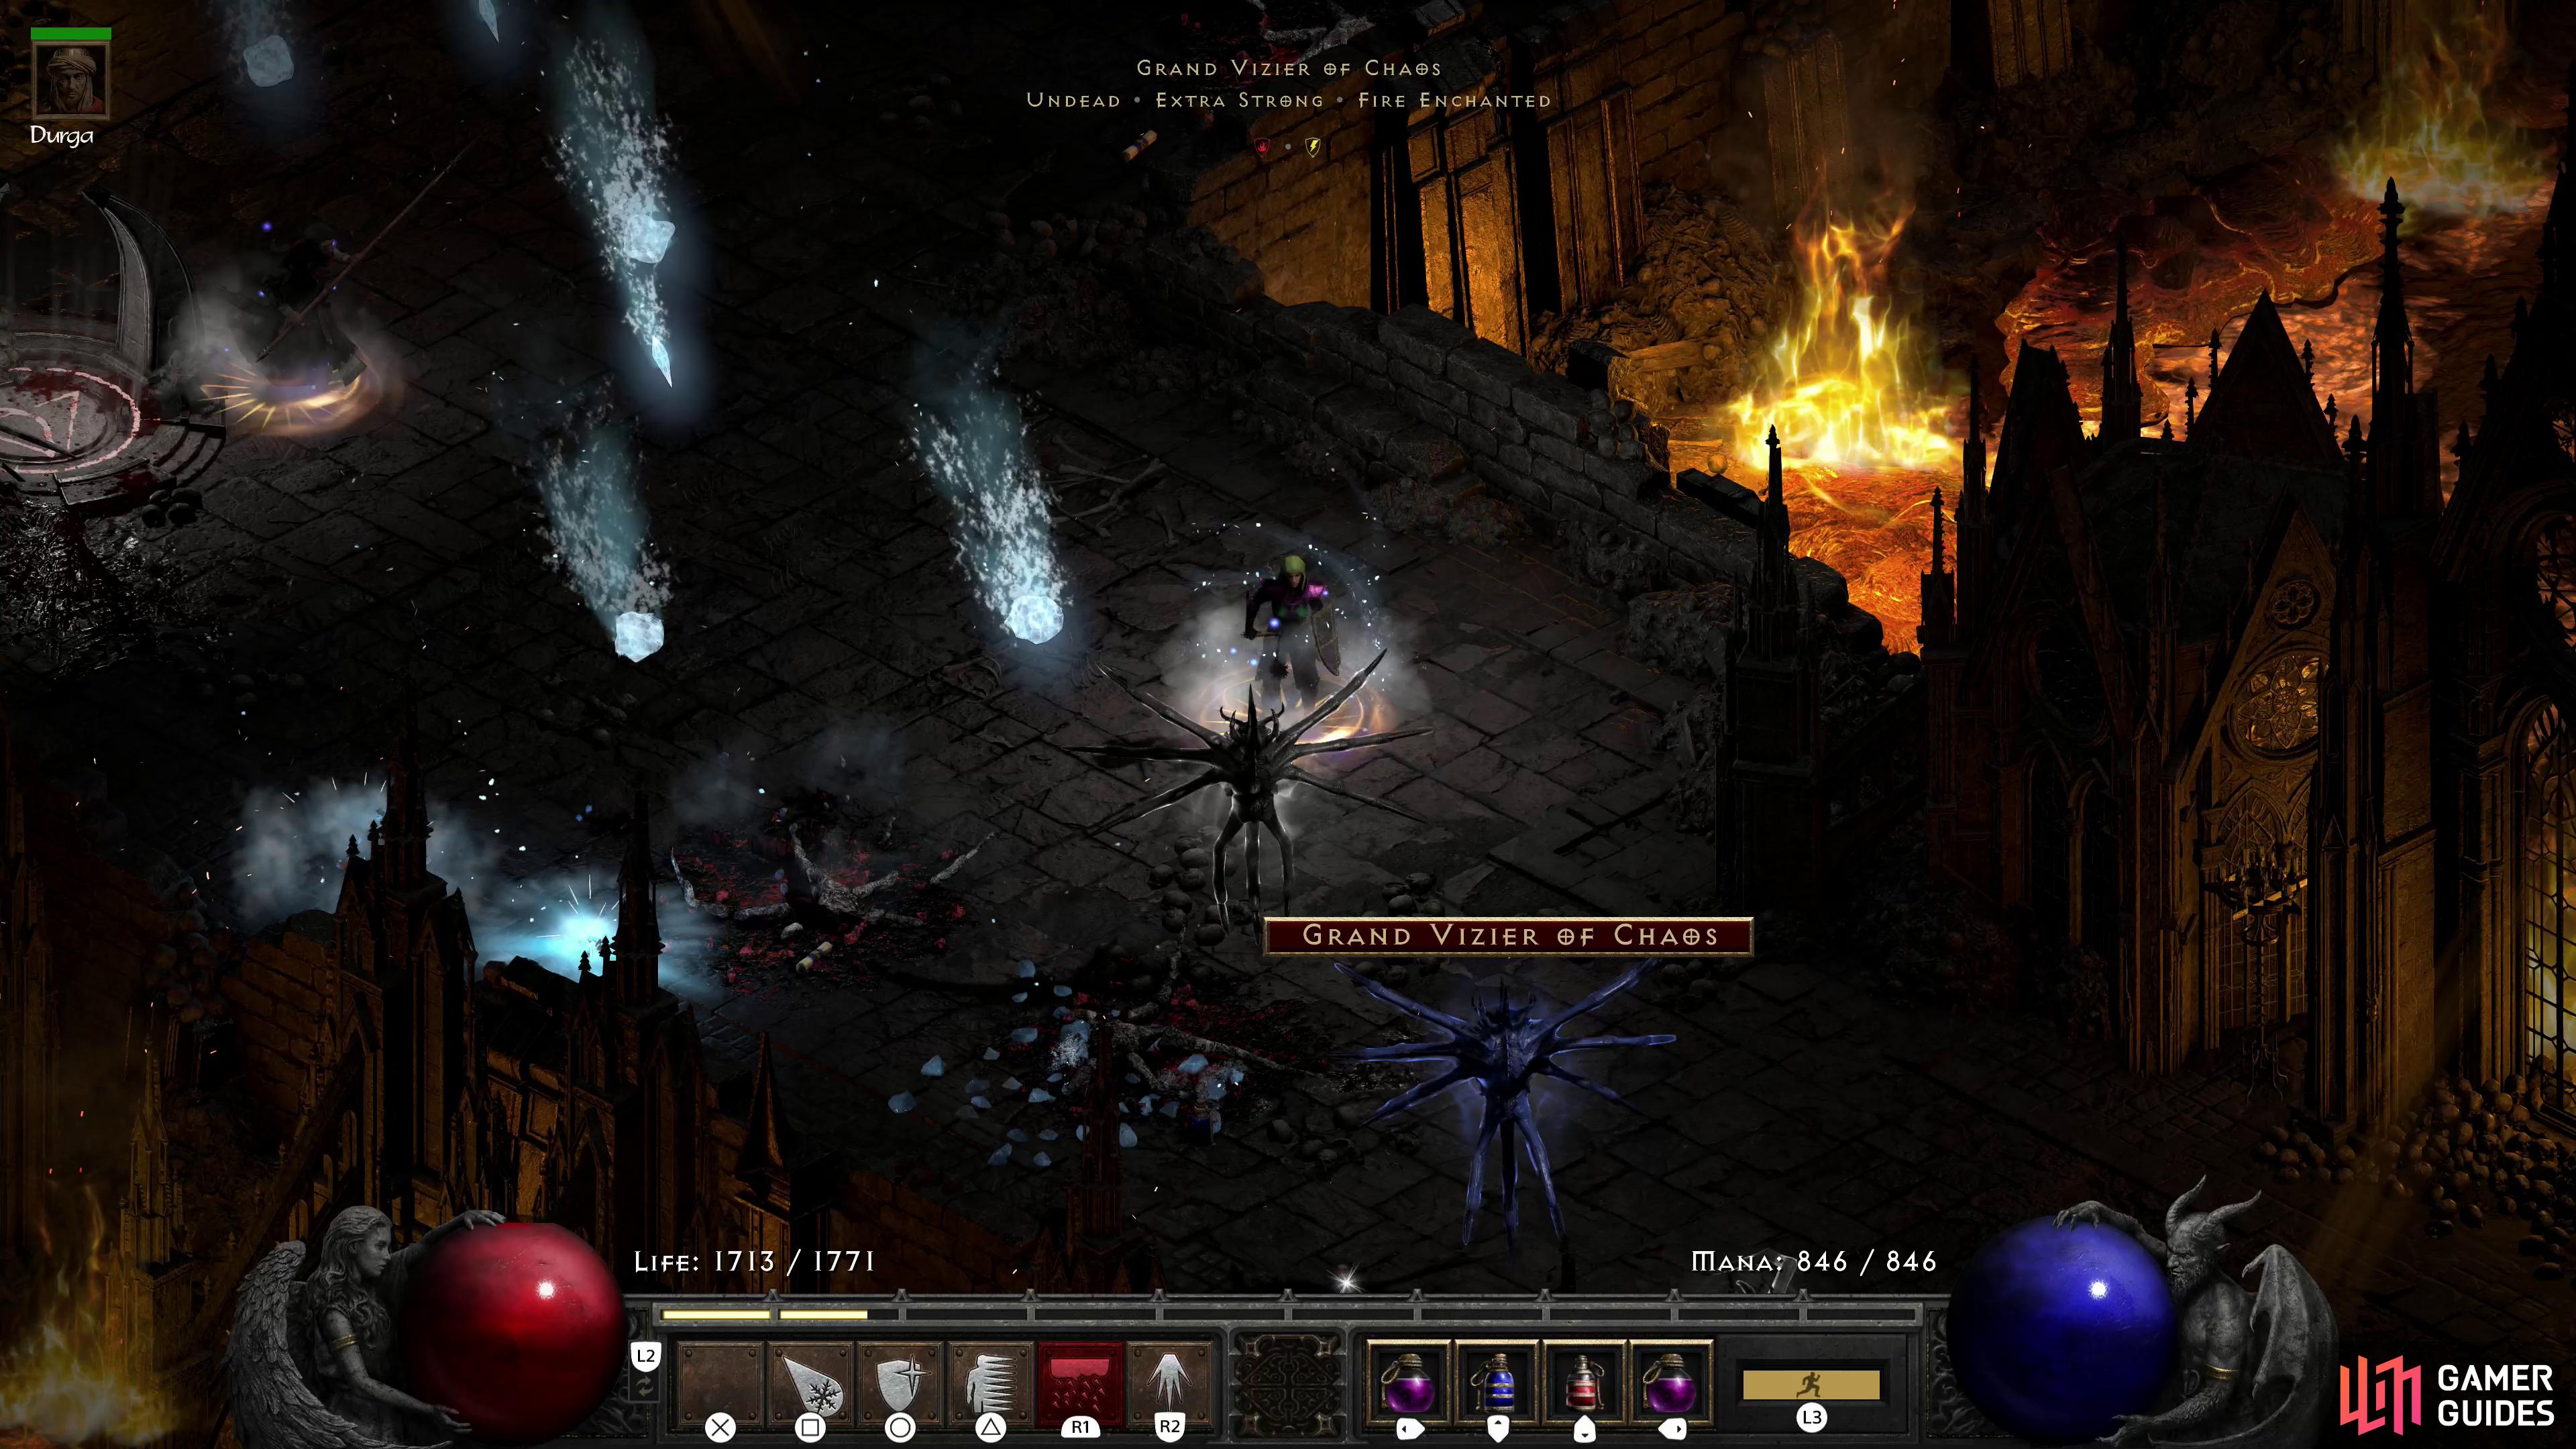 To face Diablo, you'll have to open five seals and defeat their guardians, including the Grand Vizier of Chaos,